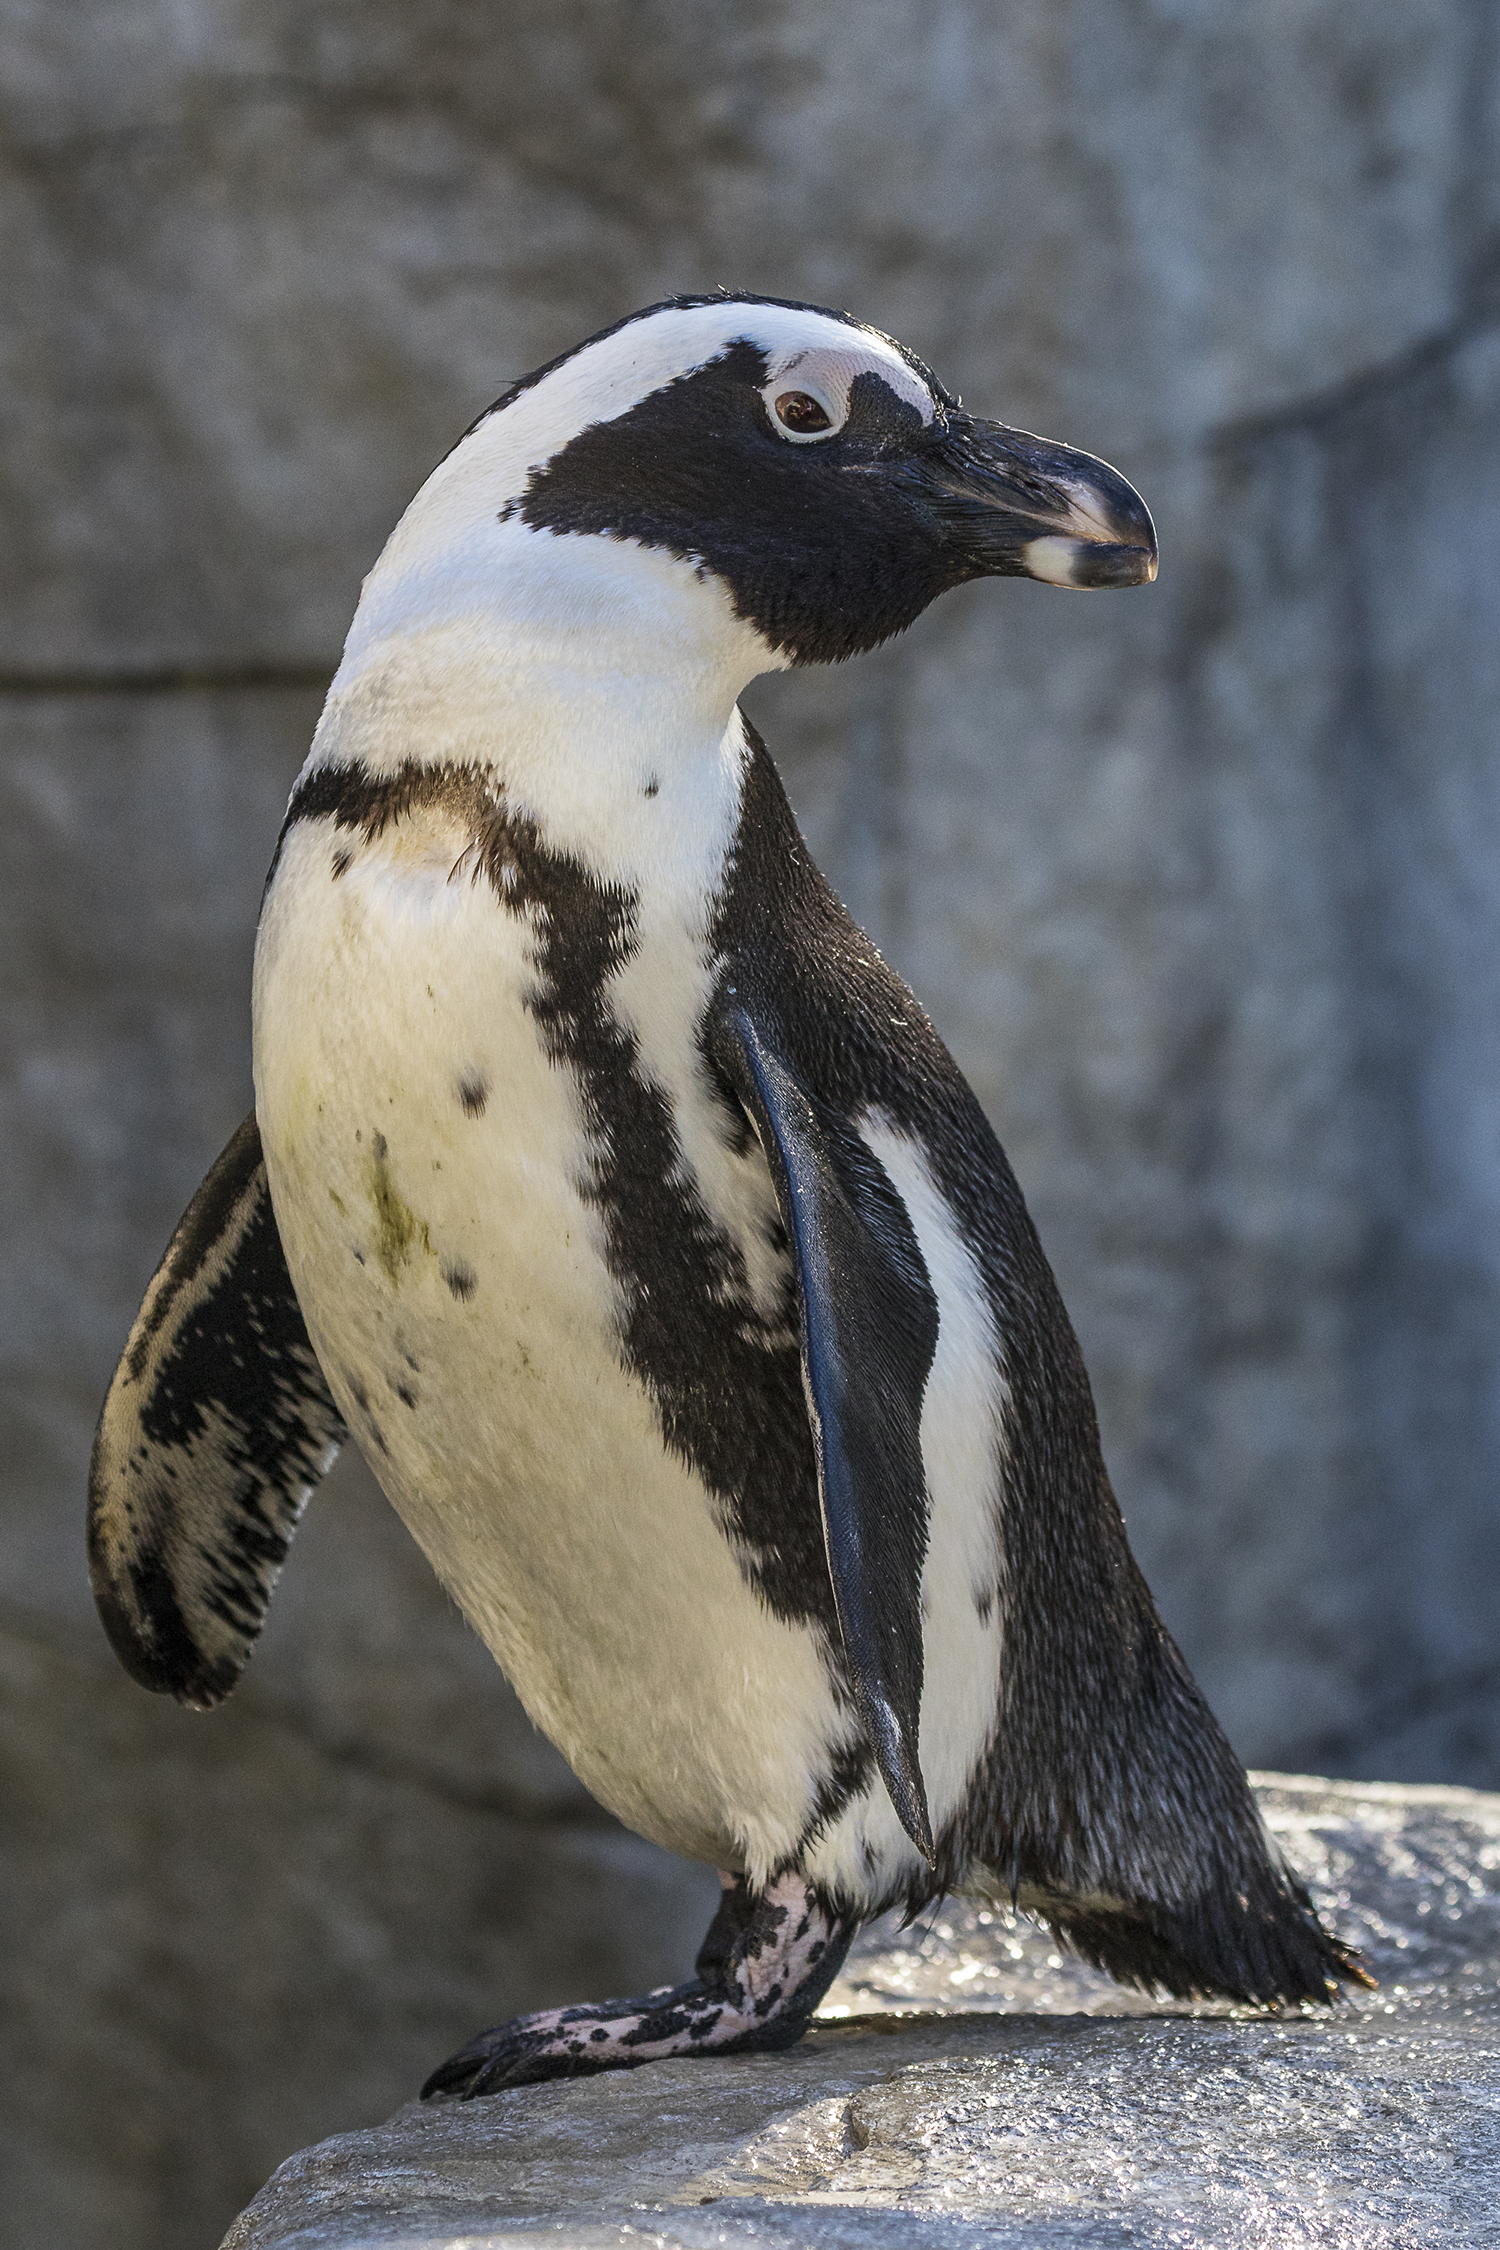 A New Habitat for Endangered African Penguins – ZOONOOZ